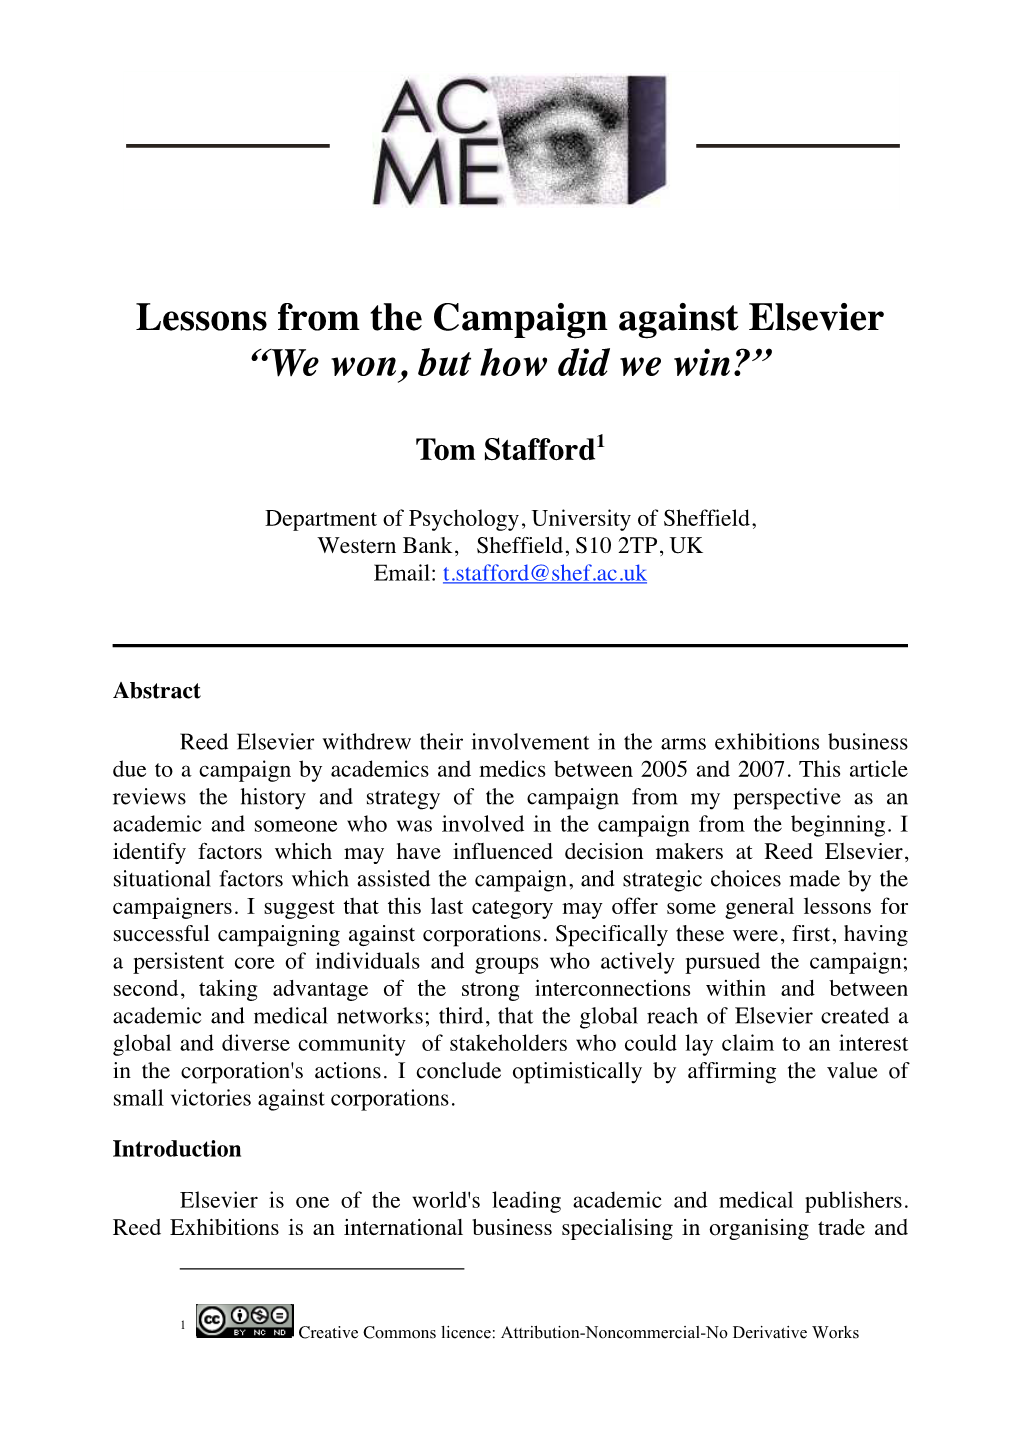 Lessons from the Campaign Against Elsevier “We Won, but How Did We Win?”